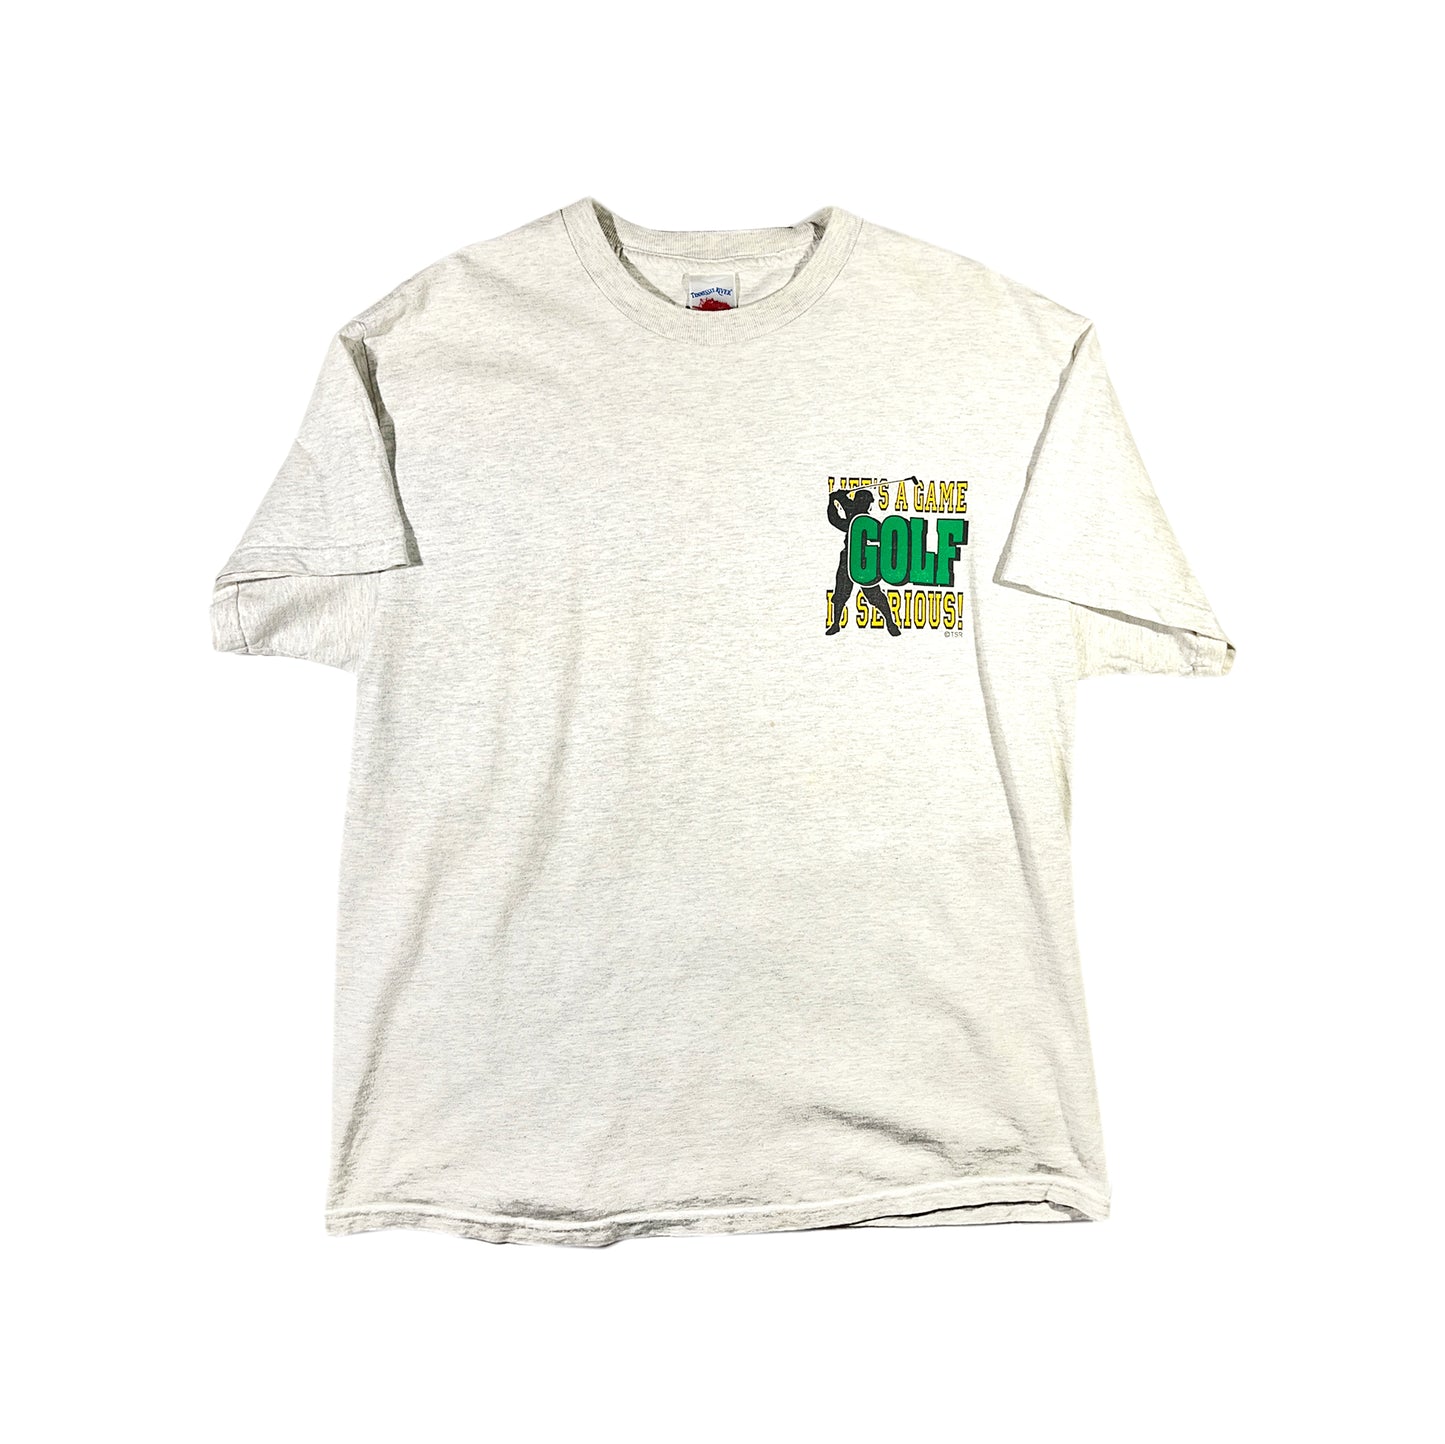 Vintage Golf T-Shirt Lifes A Game Golf Is Serious